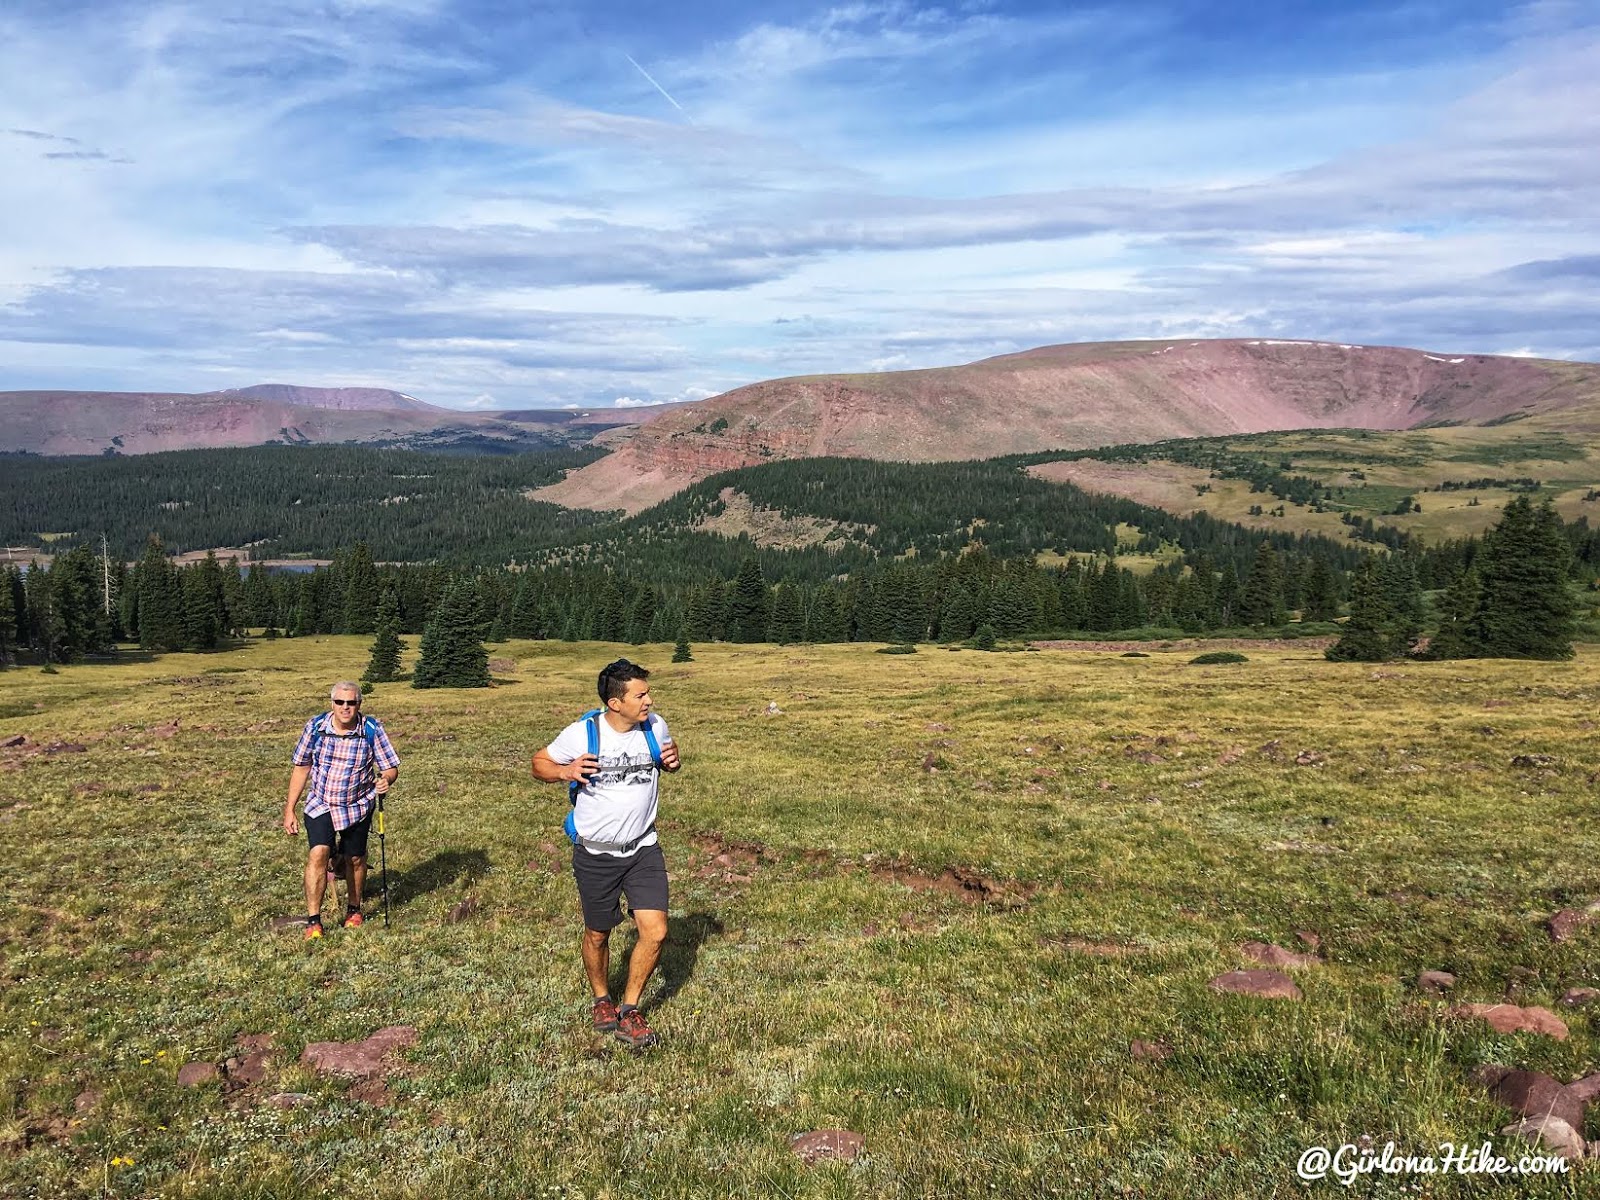 Hiking to Eccentric Benchmark, Uintah/Dagget County High Point